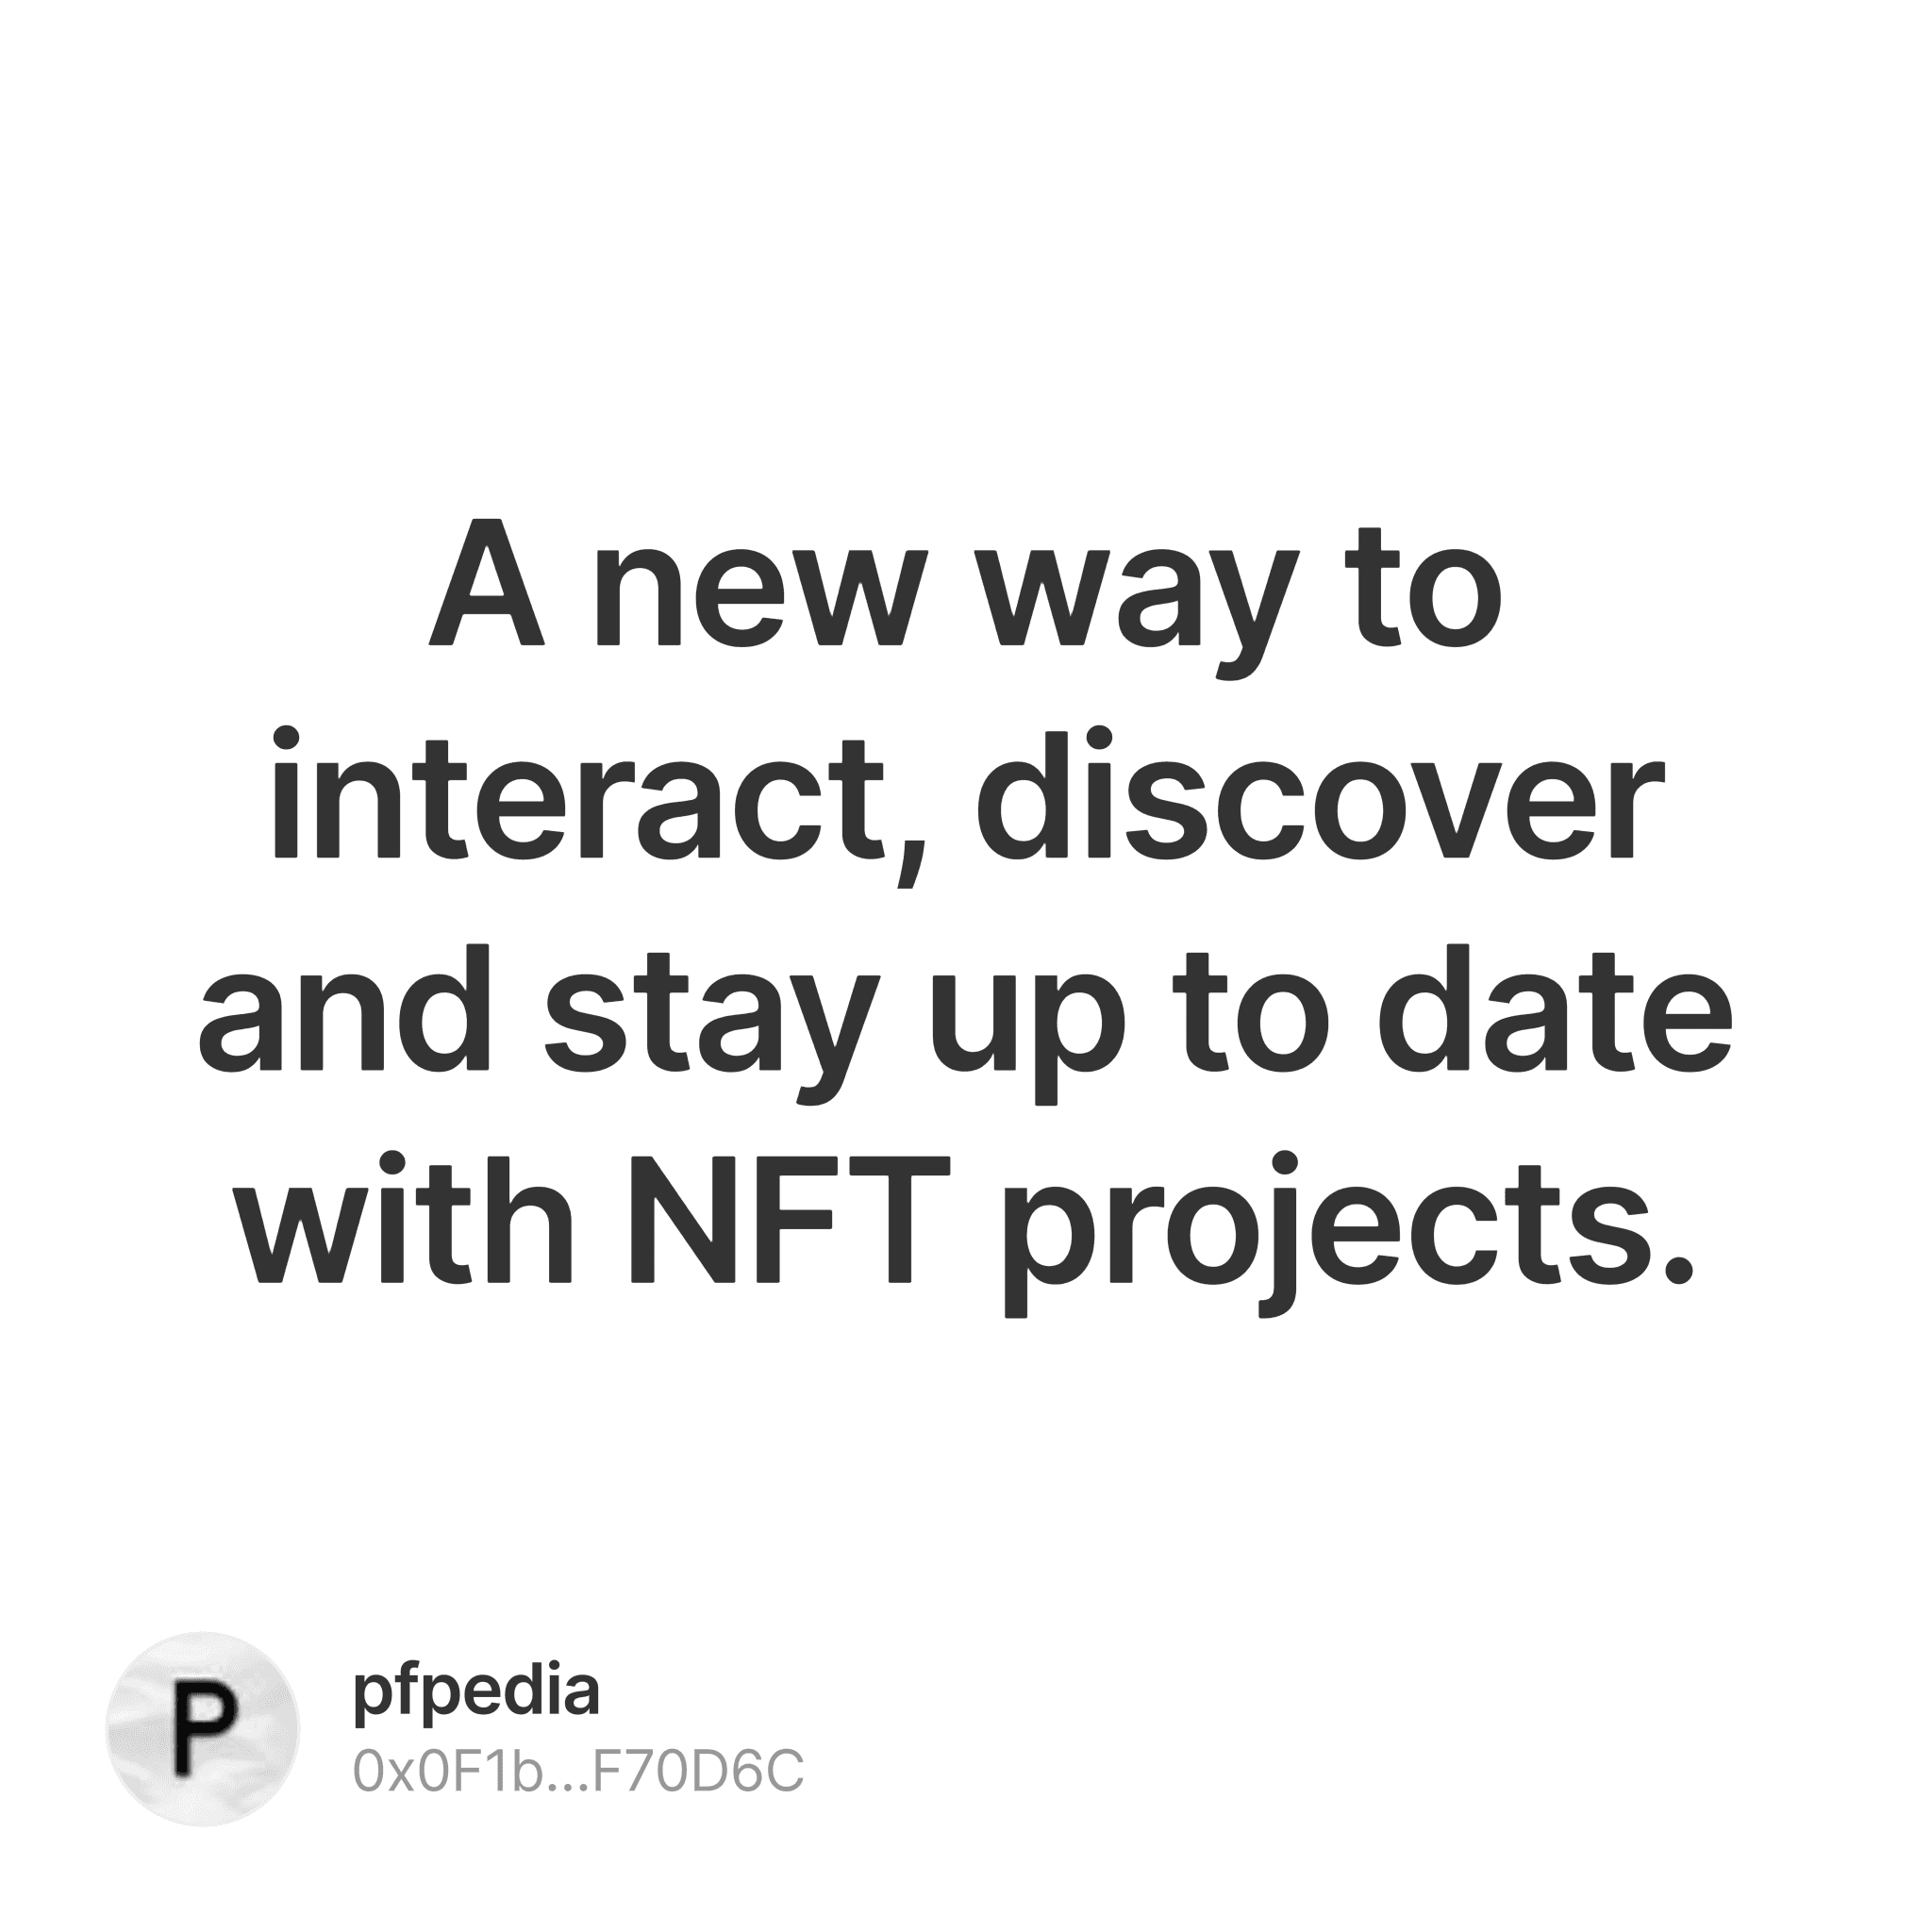 A new way to interact, discover and stay up to date with NFT projects. 2/500